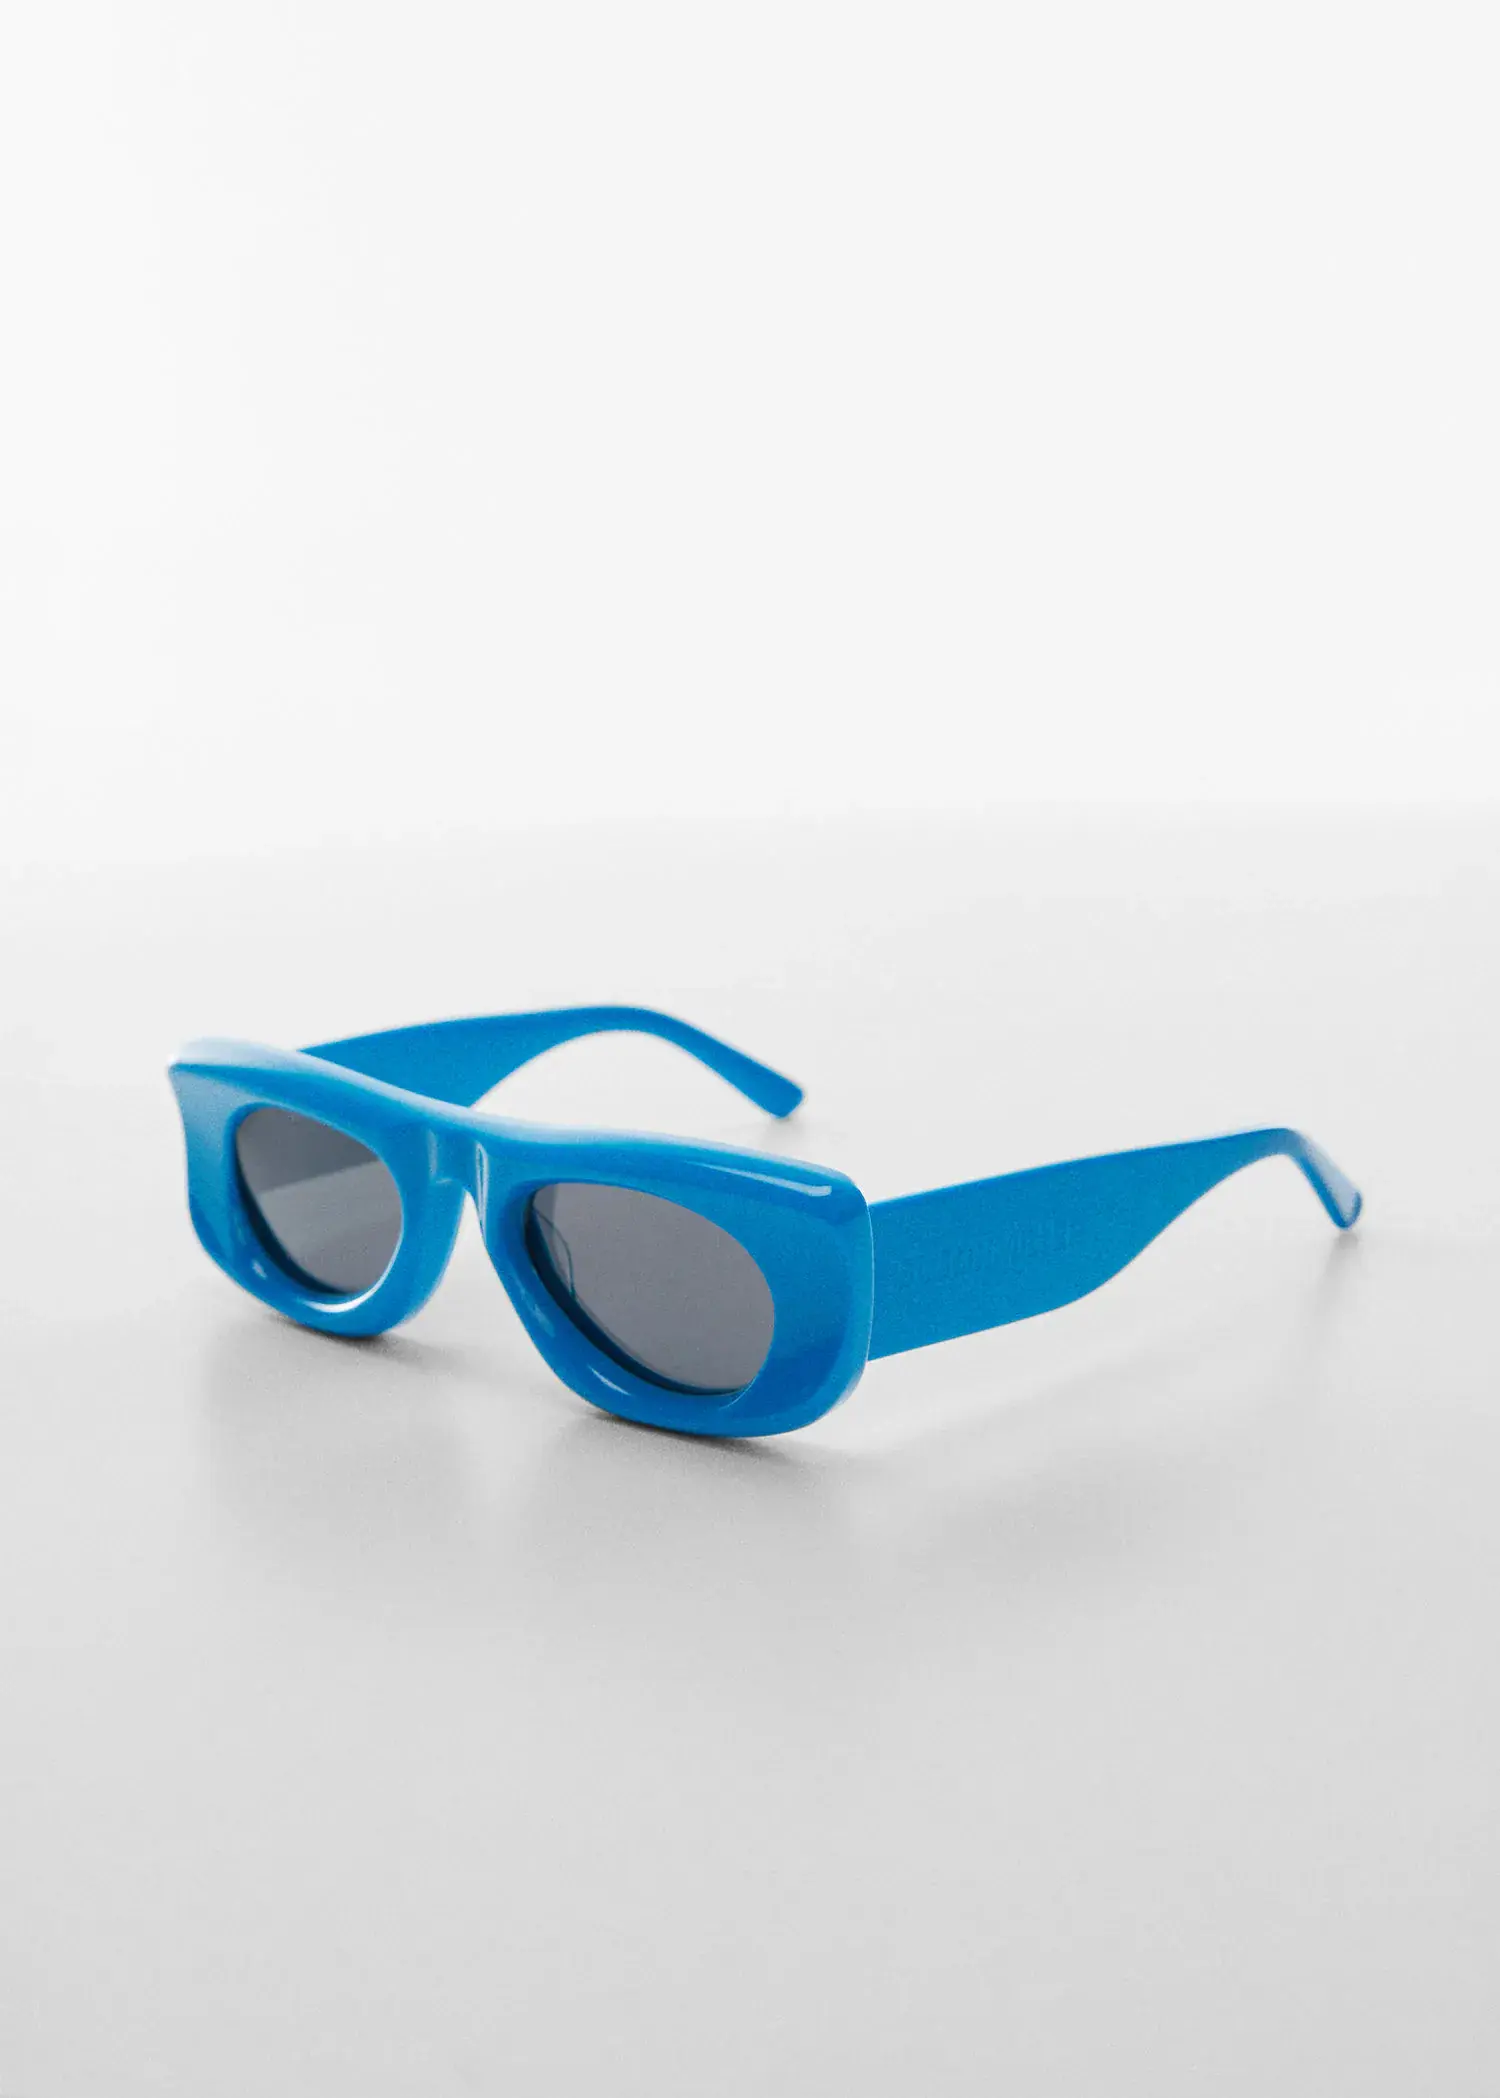 Mango Volume frame sunglasses. a pair of sunglasses sitting on top of a white table. 